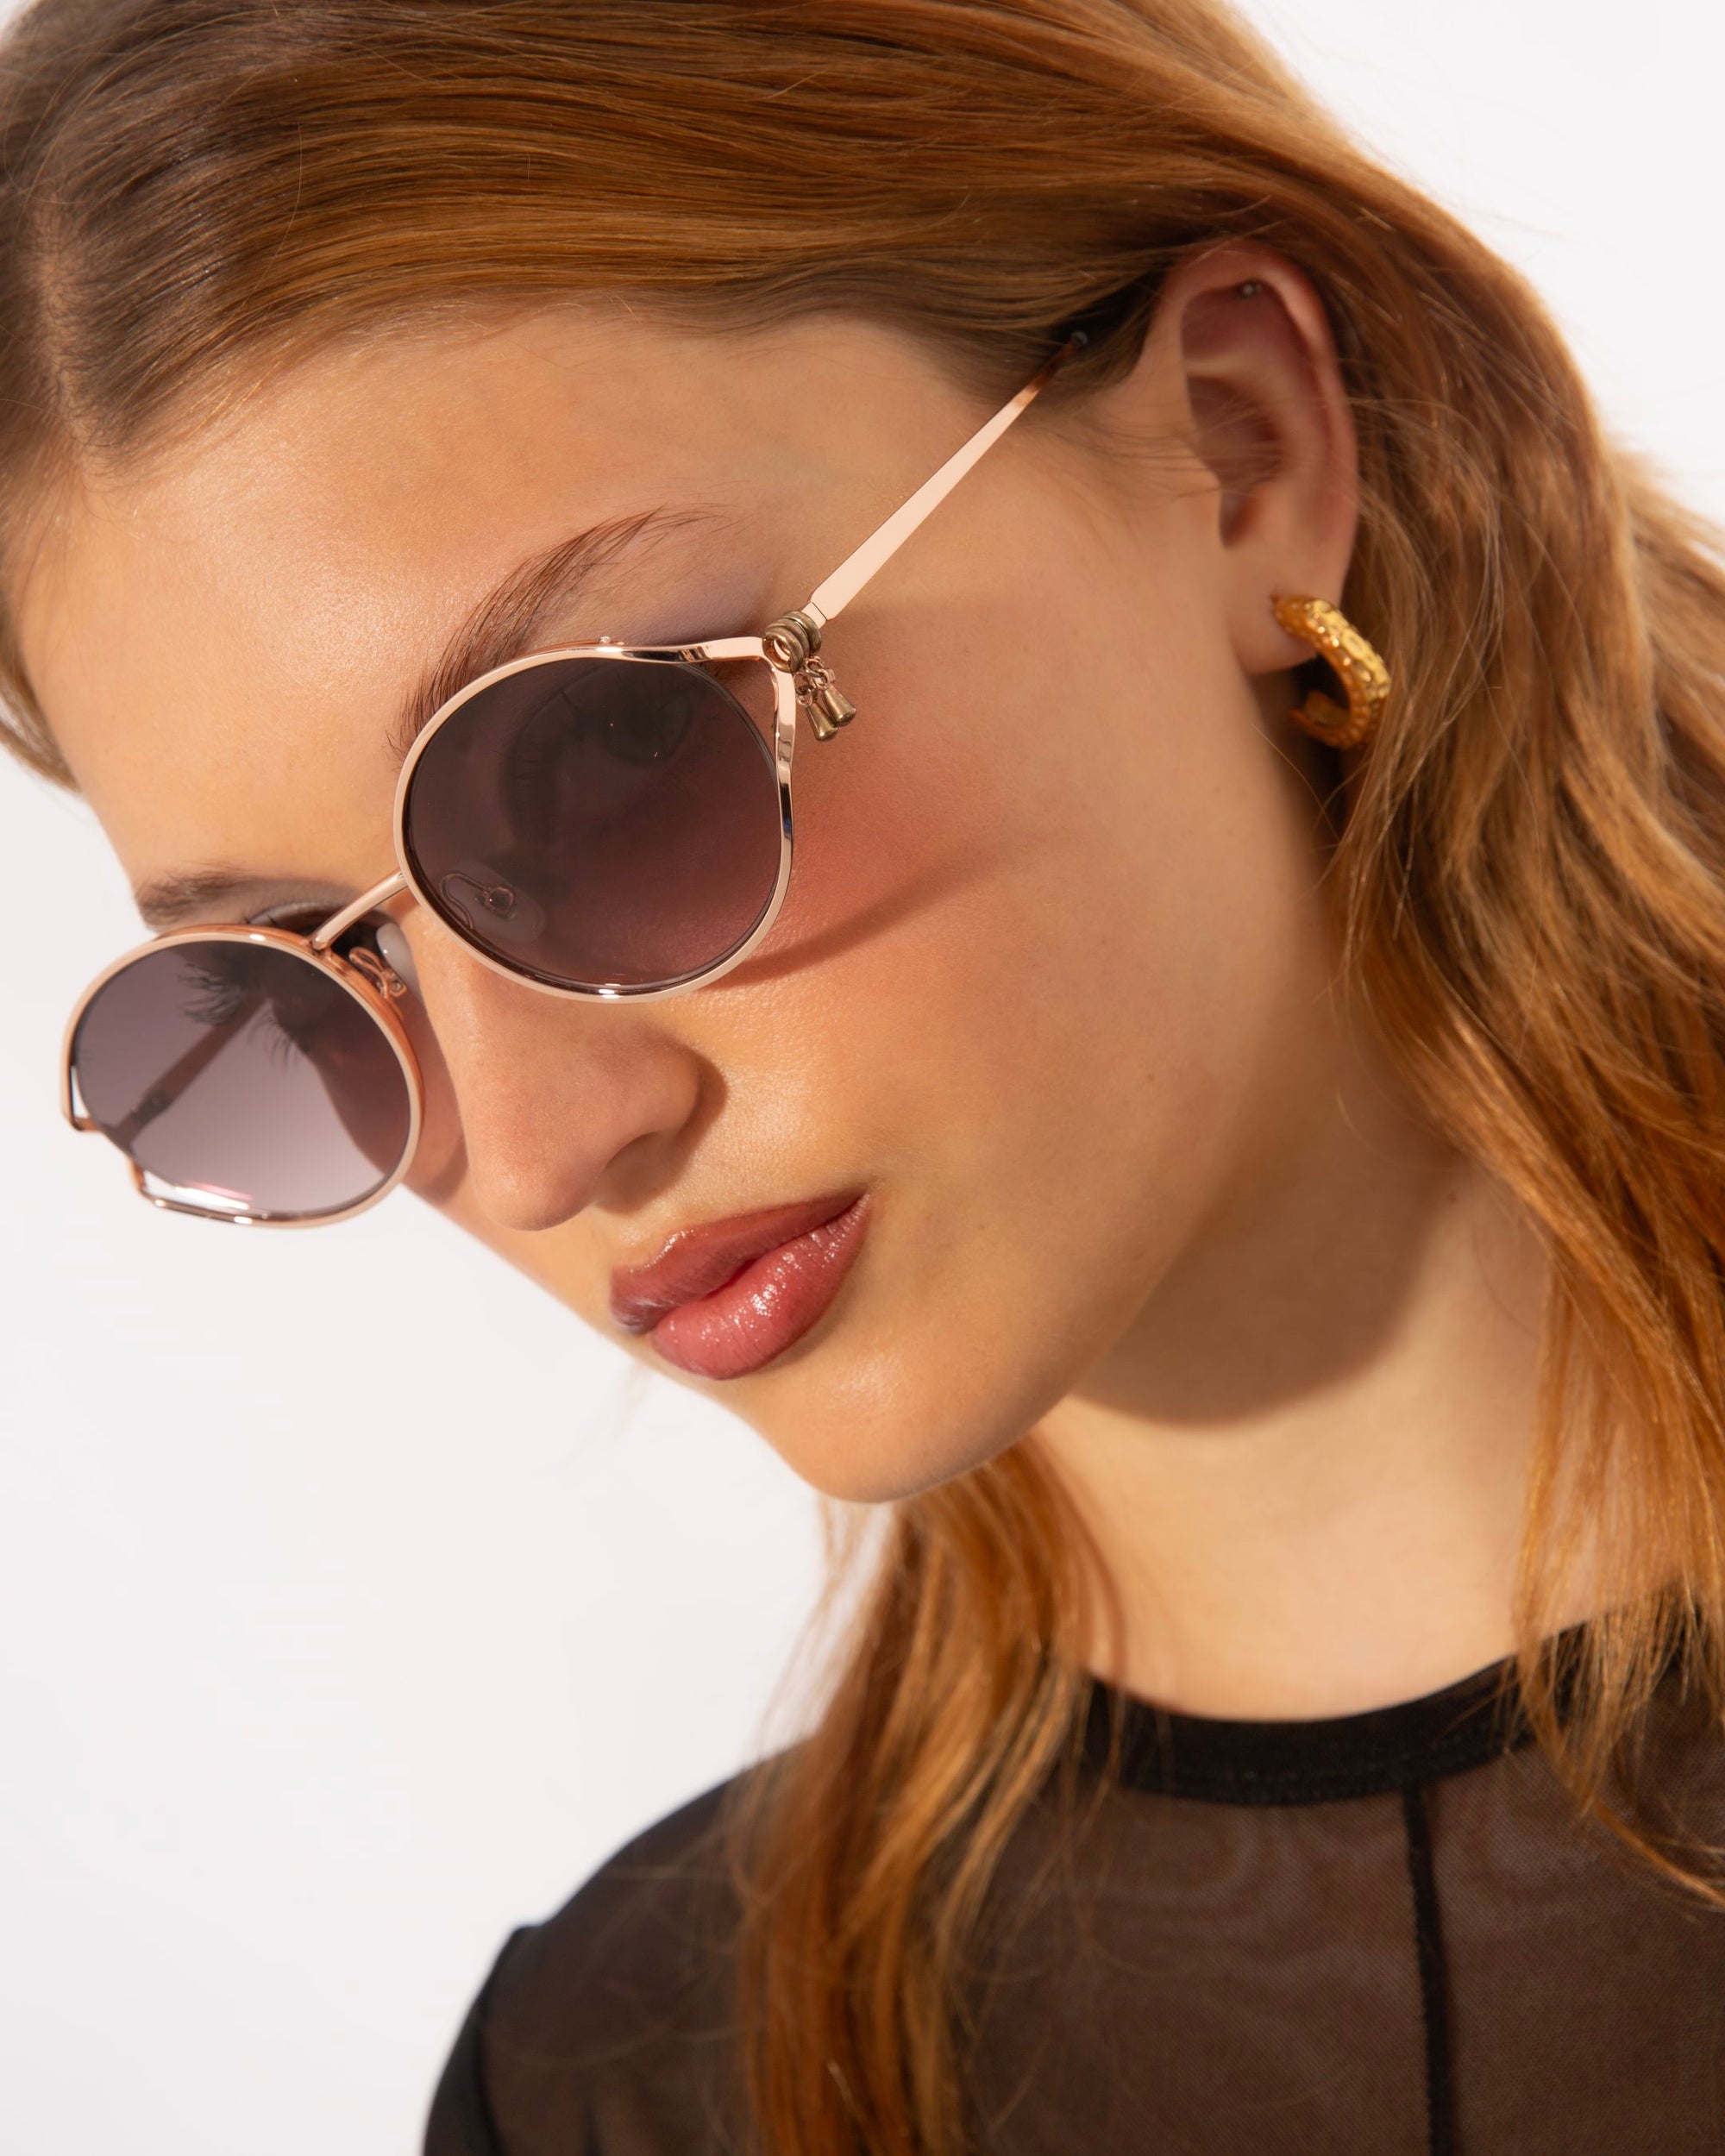 A person with long, light brown hair is wearing For Art&#39;s Sake® Sky sunglasses with jade-stone nose pads and gold hoop earrings. They are looking slightly downwards with a neutral expression while sporting a black, semi-sheer top. The background is plain white.